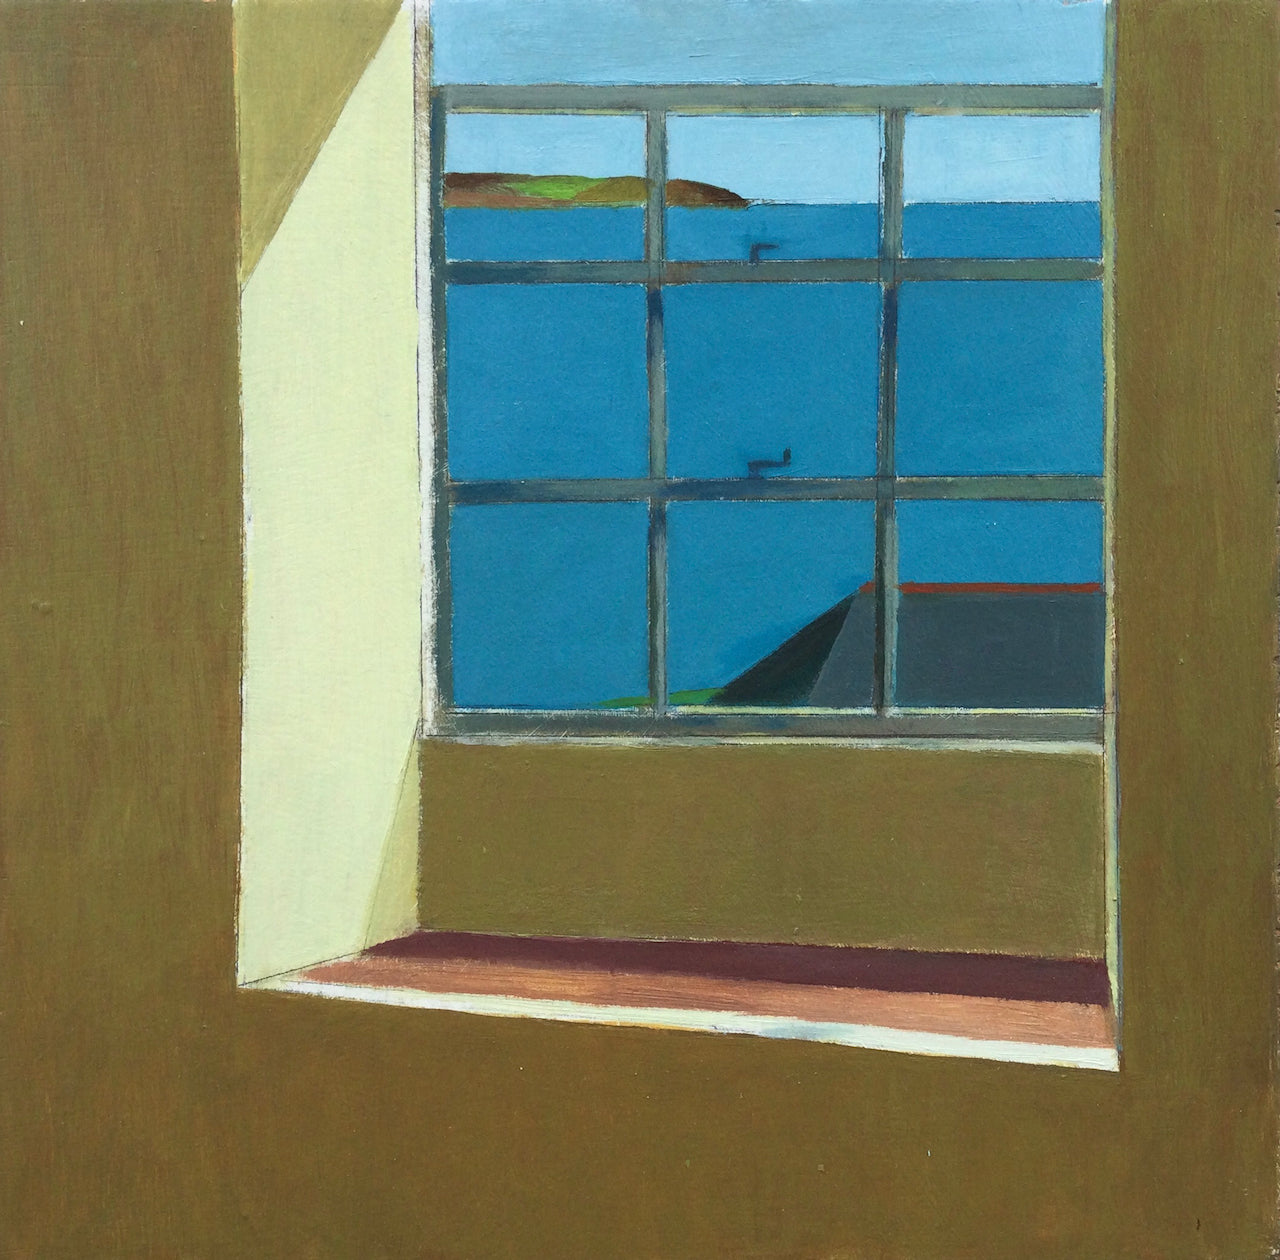 Painting by Cornwall artist Philp Lyon of a ochre coloured window sill and surround looking out to blue sea and headland 